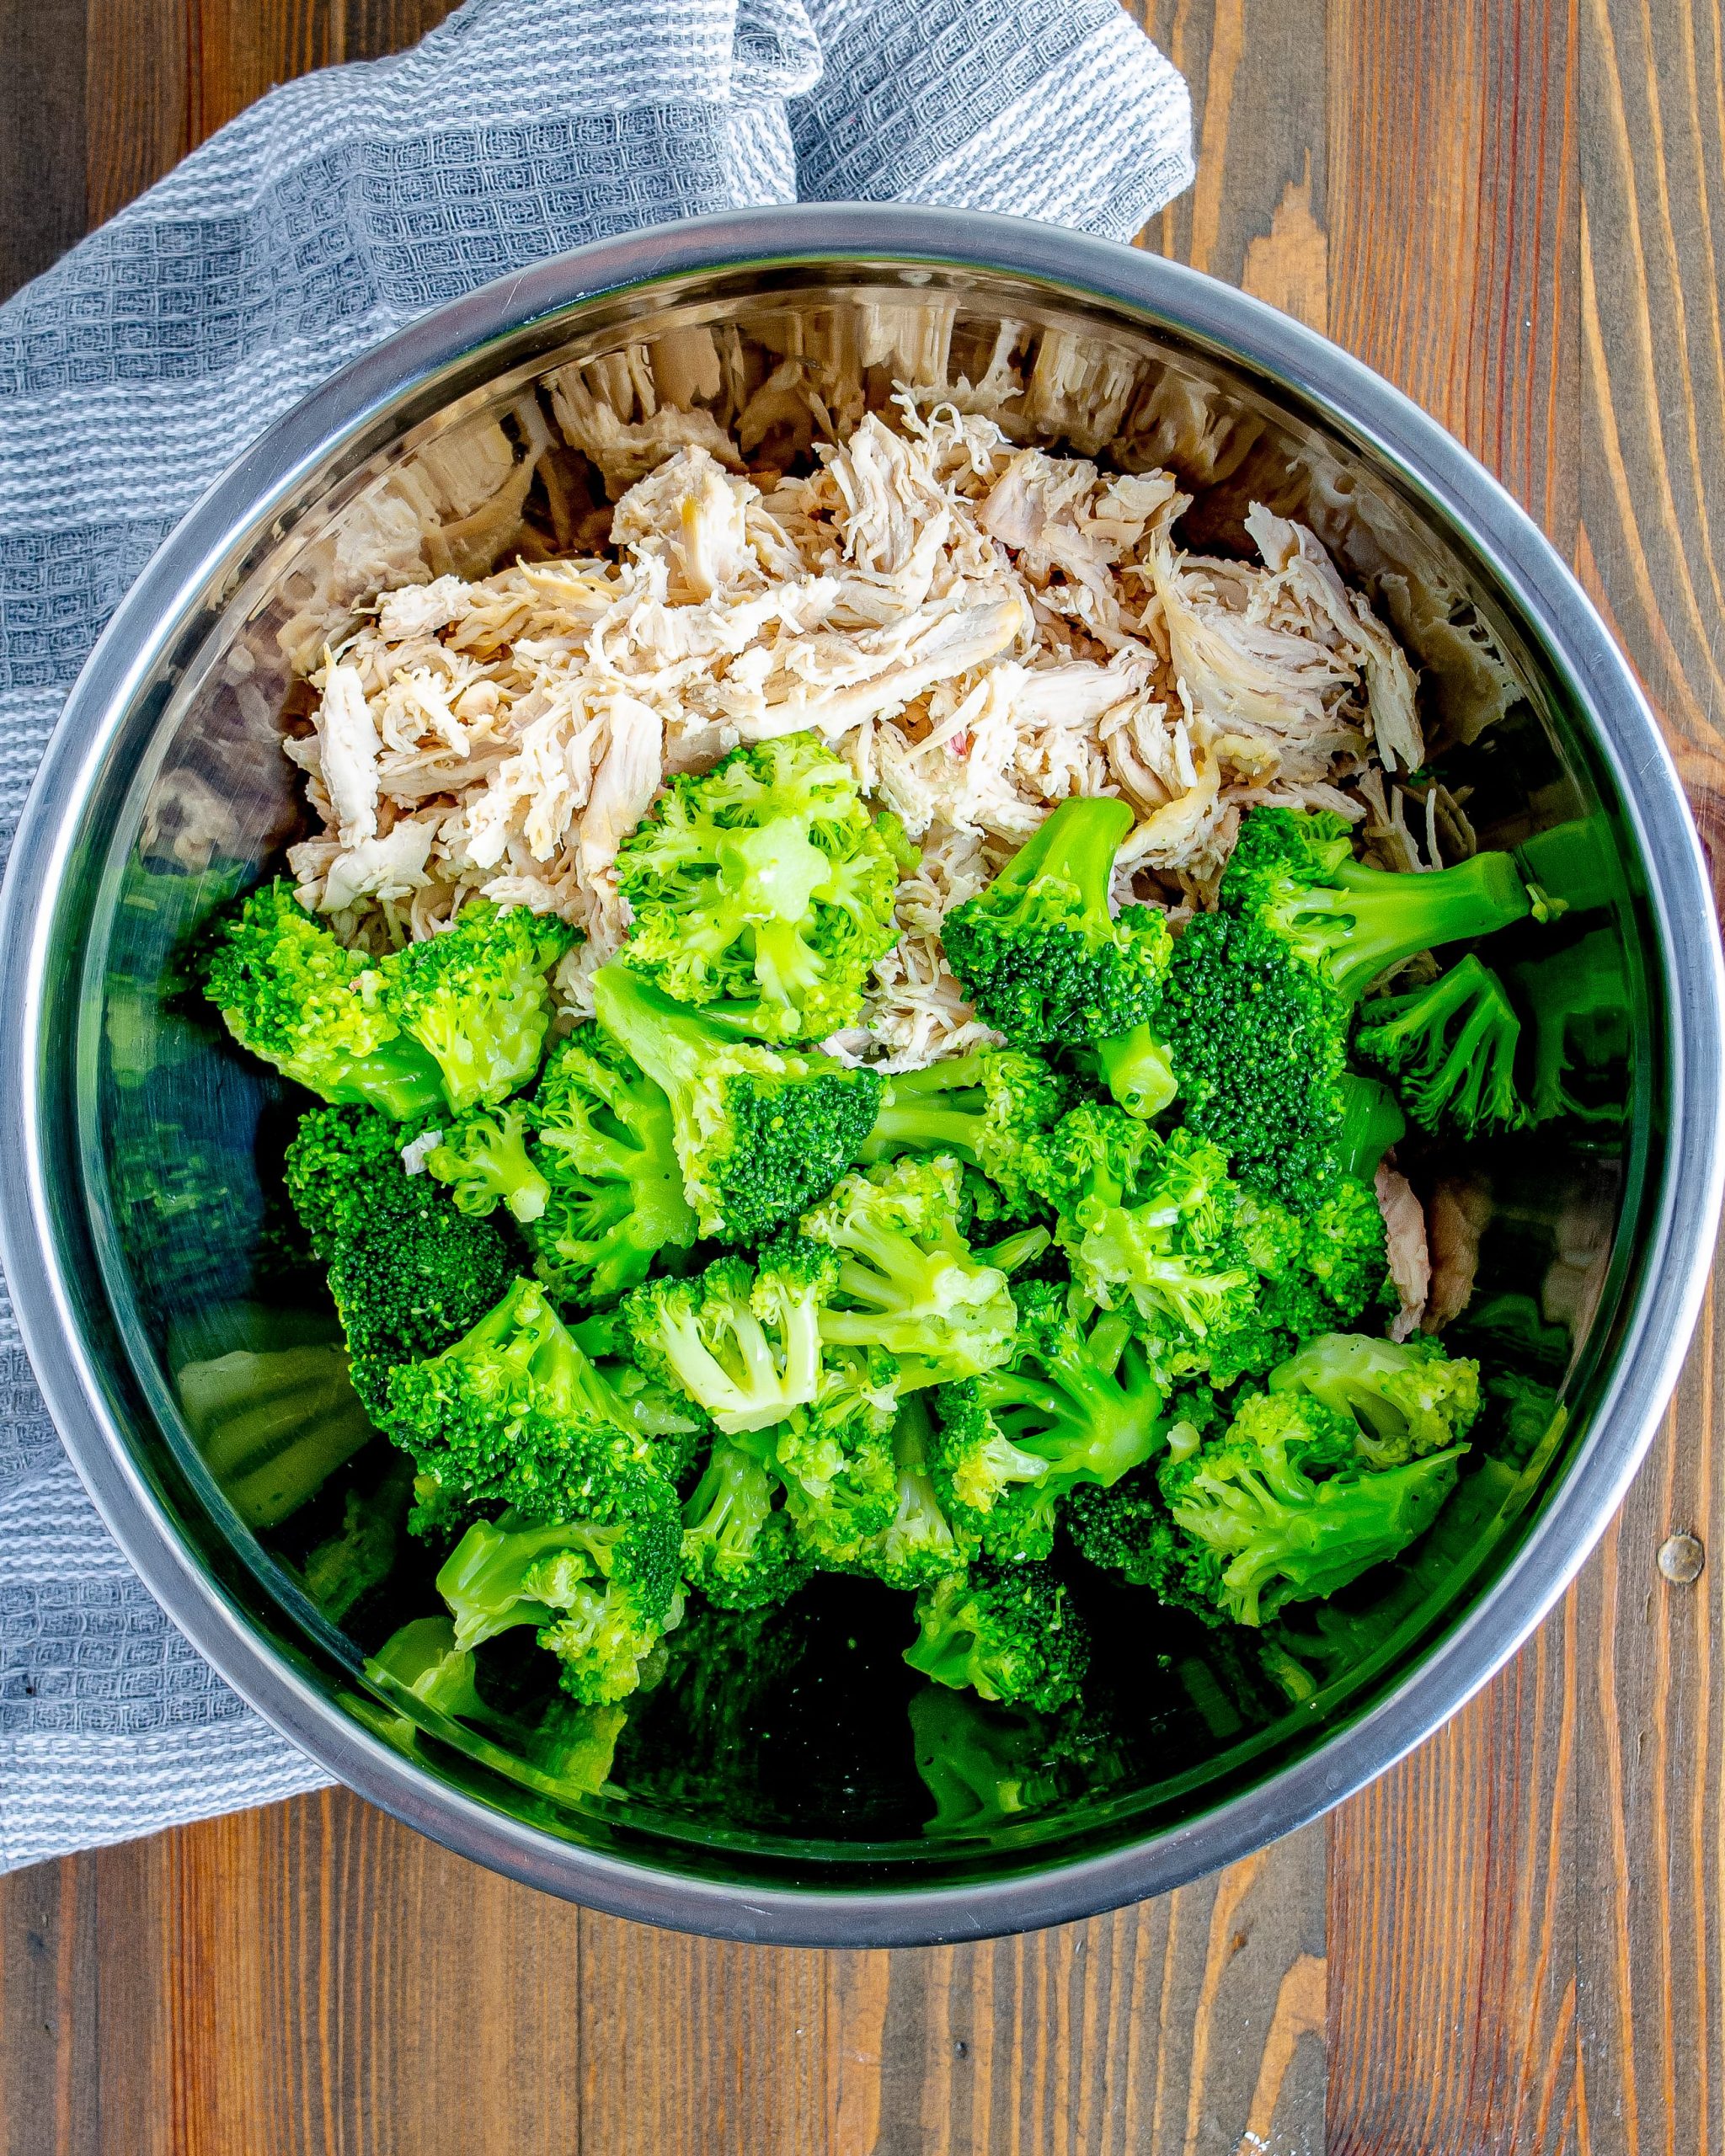 In a large mixing bowl, combine the shredded chicken and cooked broccoli.